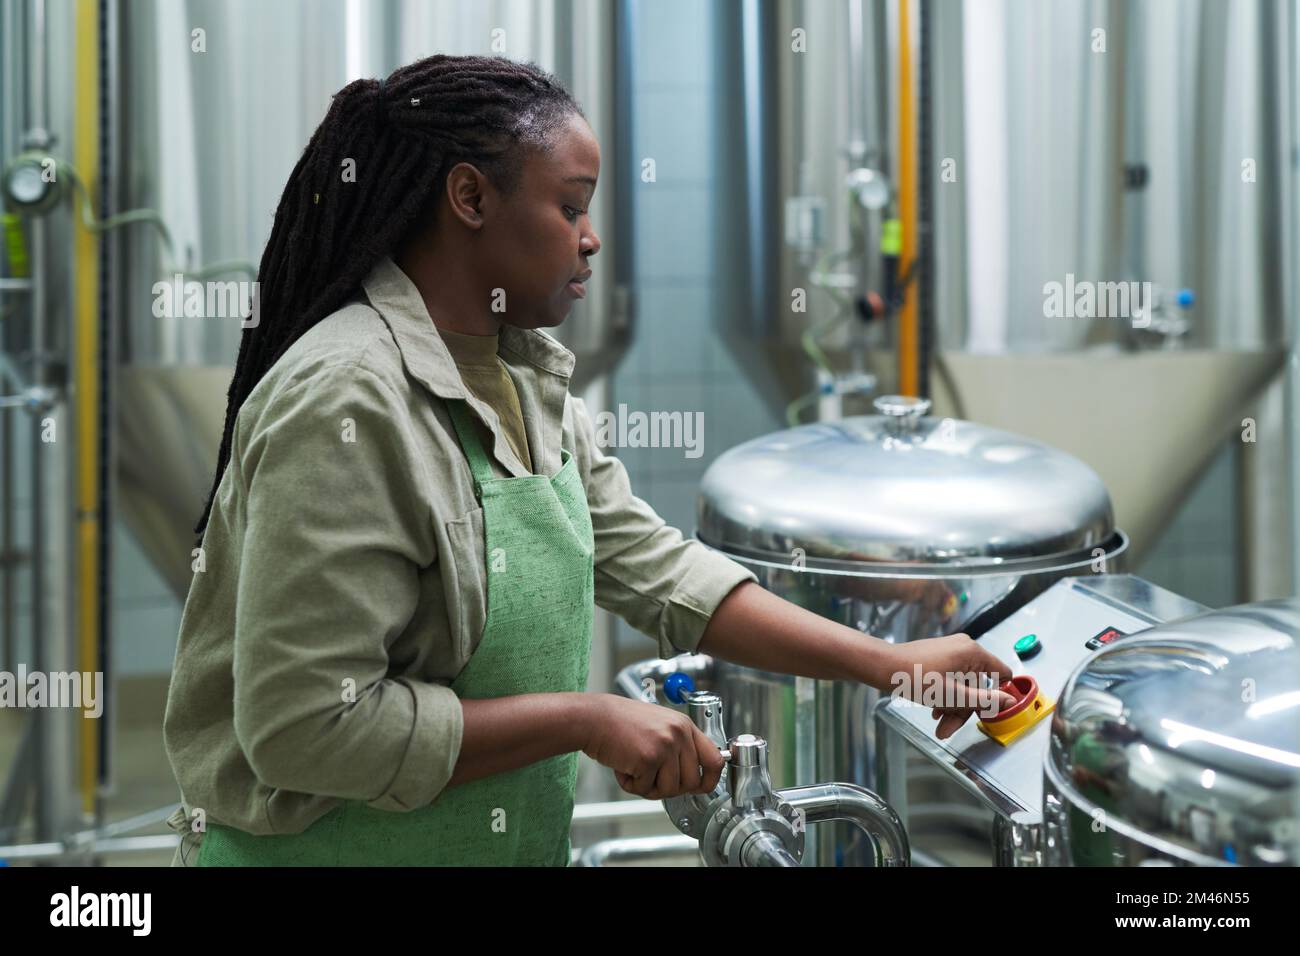 Brewery worker setting equipment for beer production Stock Photo